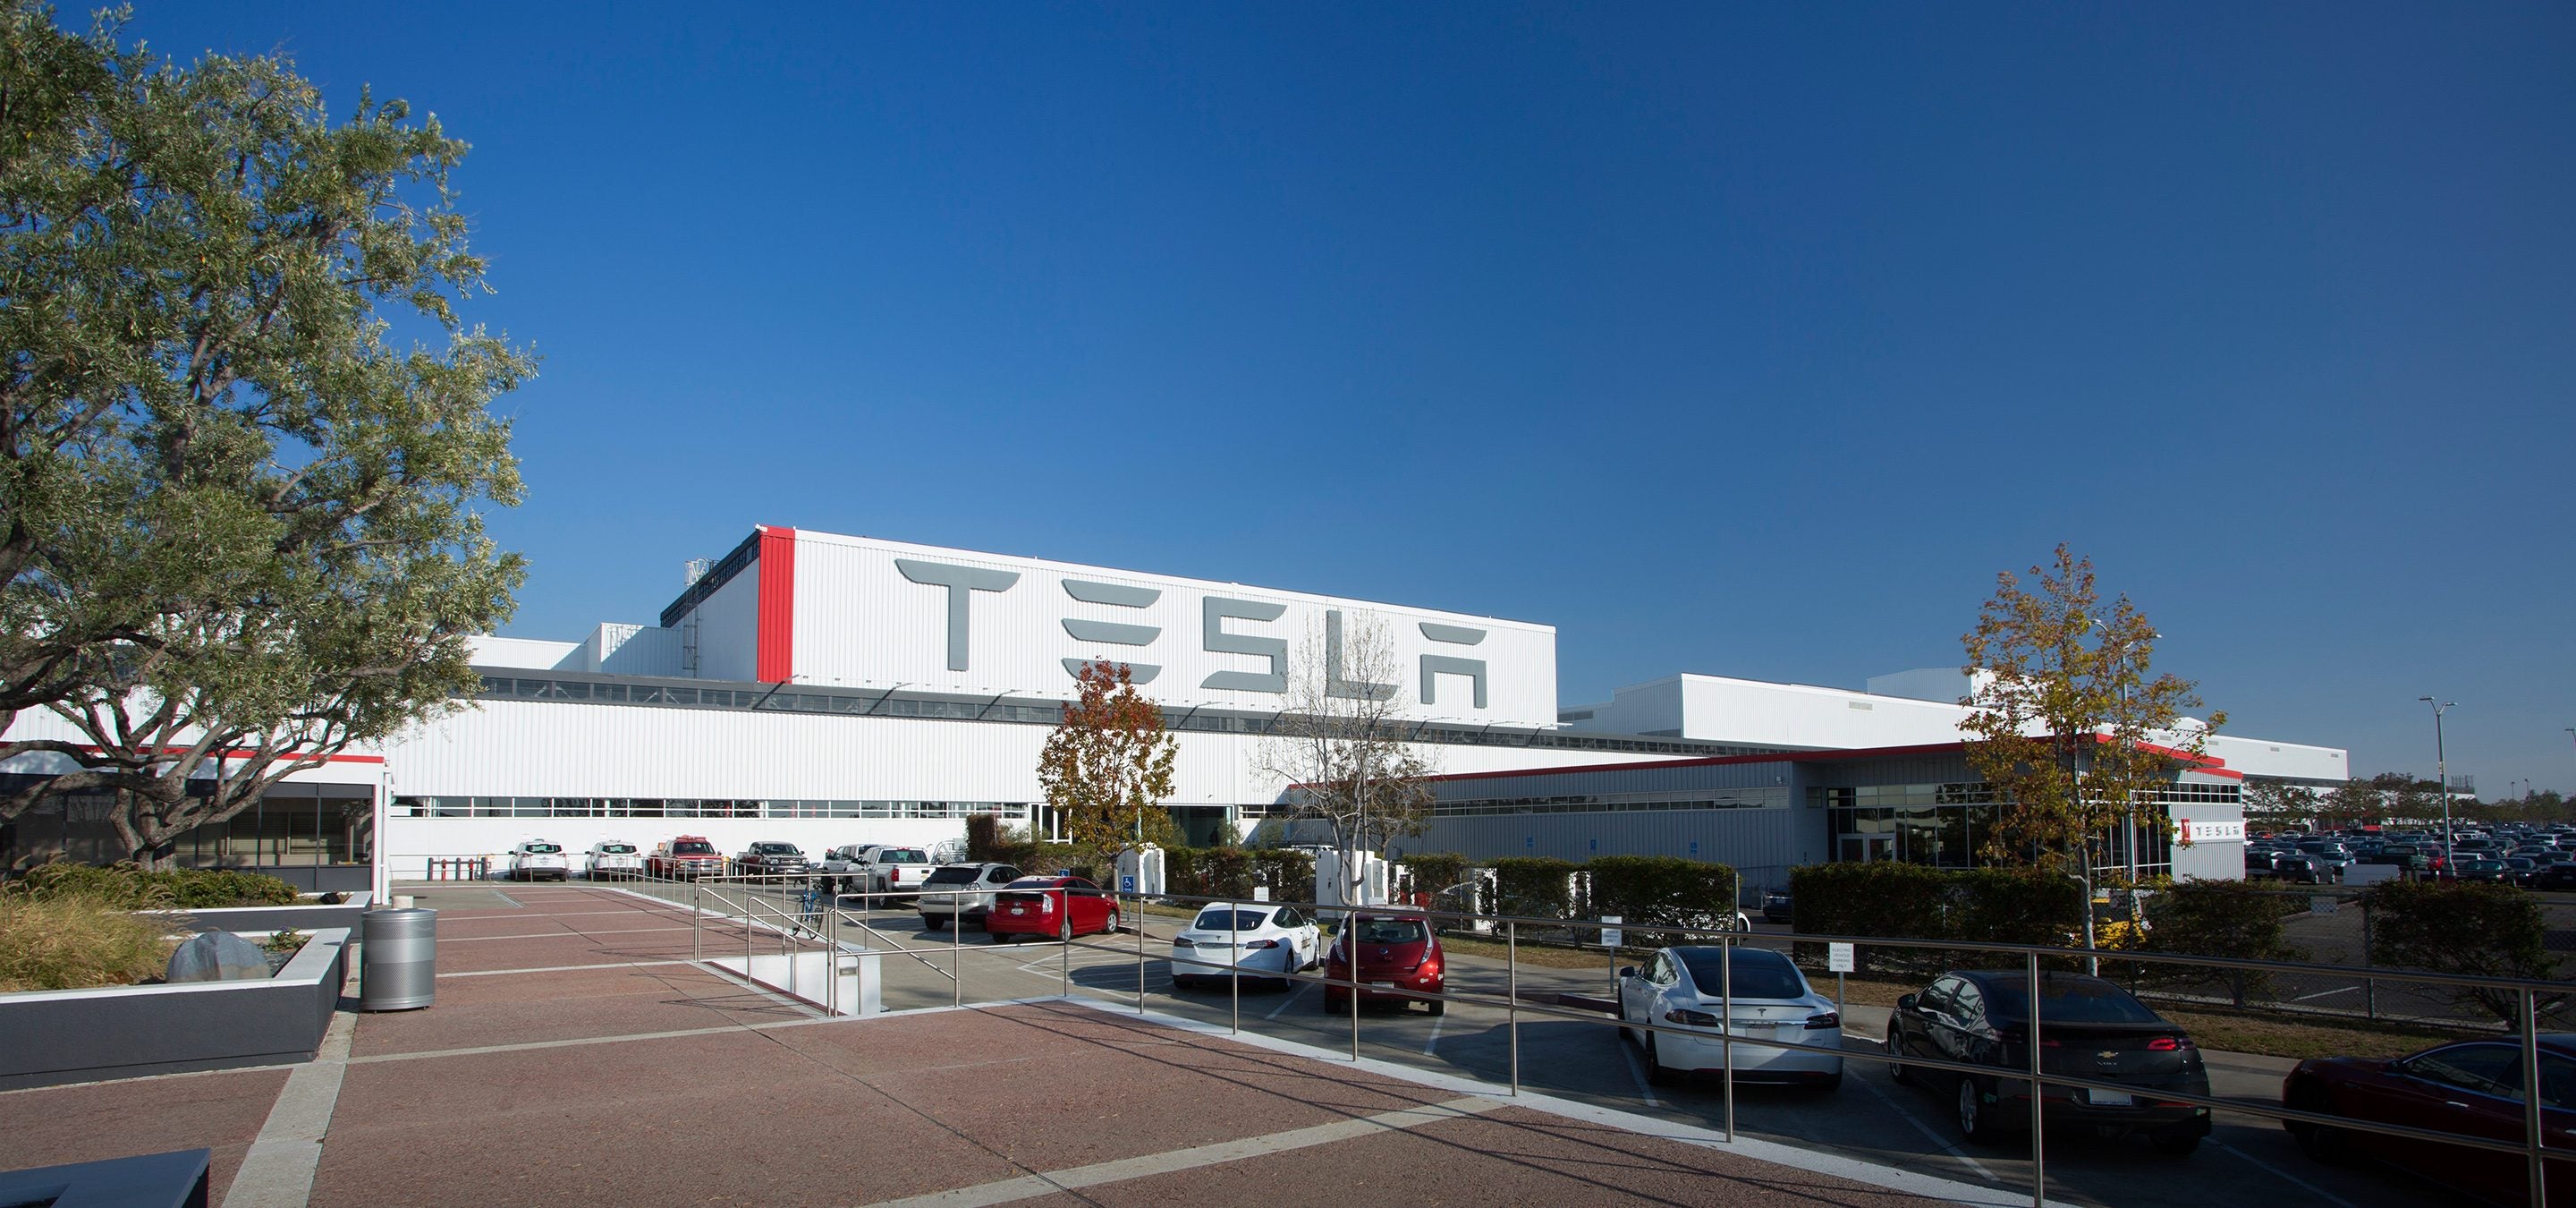 Tesla Offers PTO for All Employees During The Critical Moment [Updated]